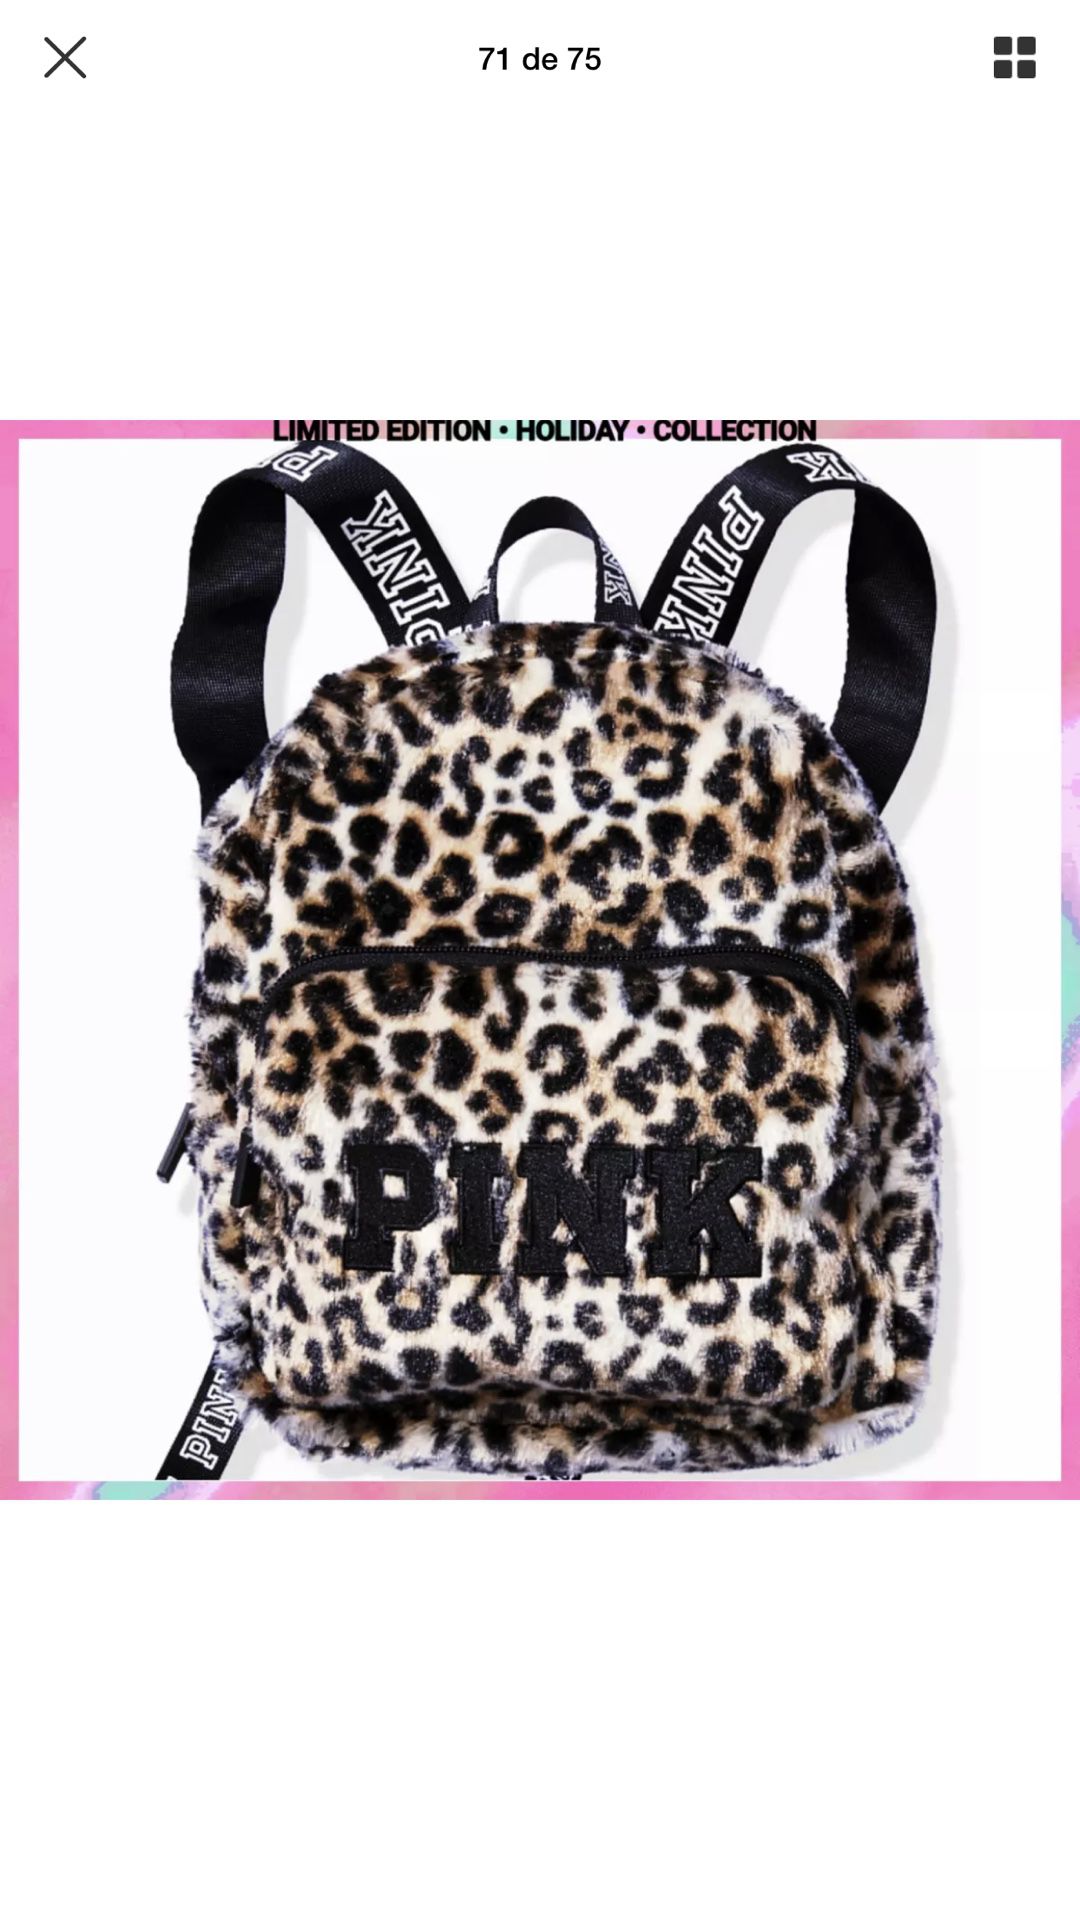 SALE $25.00 WAS $30.00 New Victoria’s Secret Pink Leopard Faux Mini Backpack Limited Edition